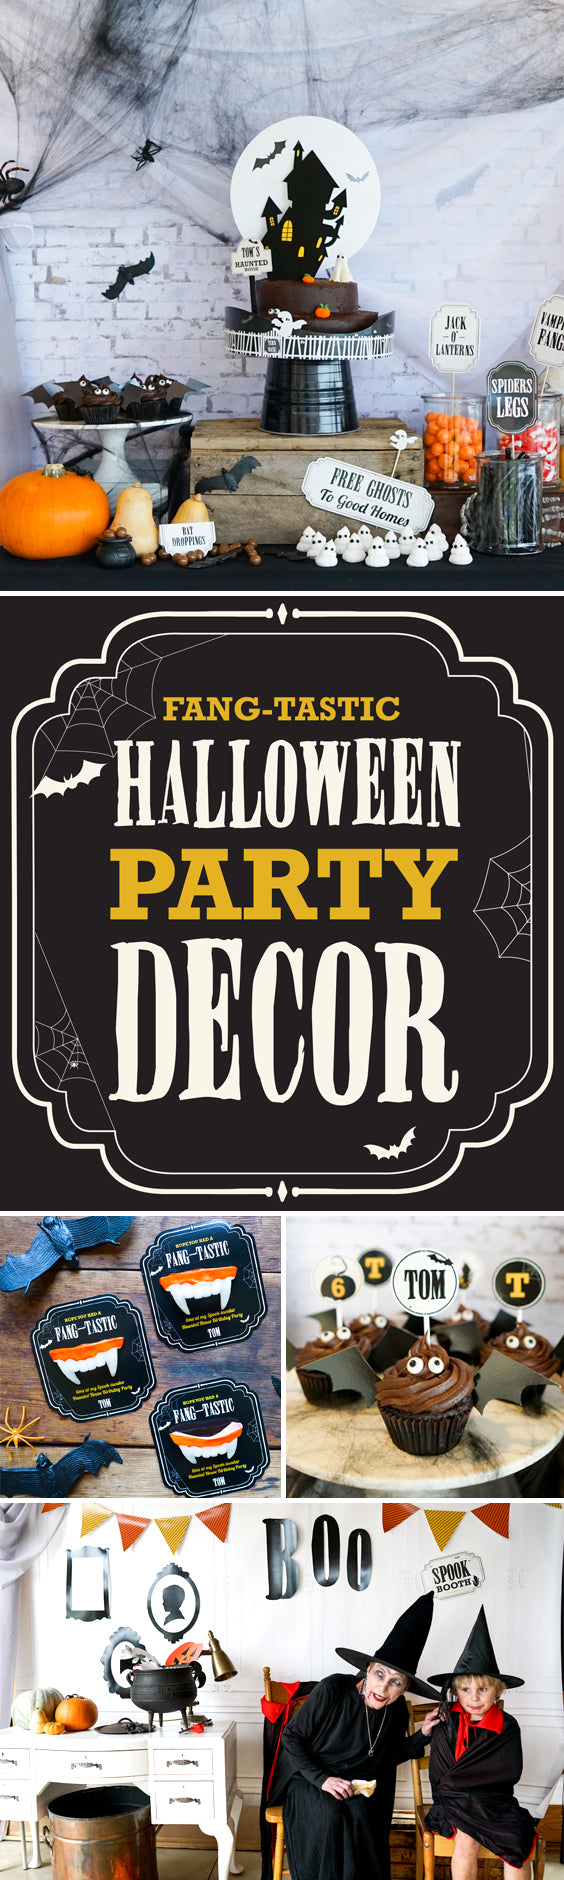 DIY Halloween Party Decorations and Ideas